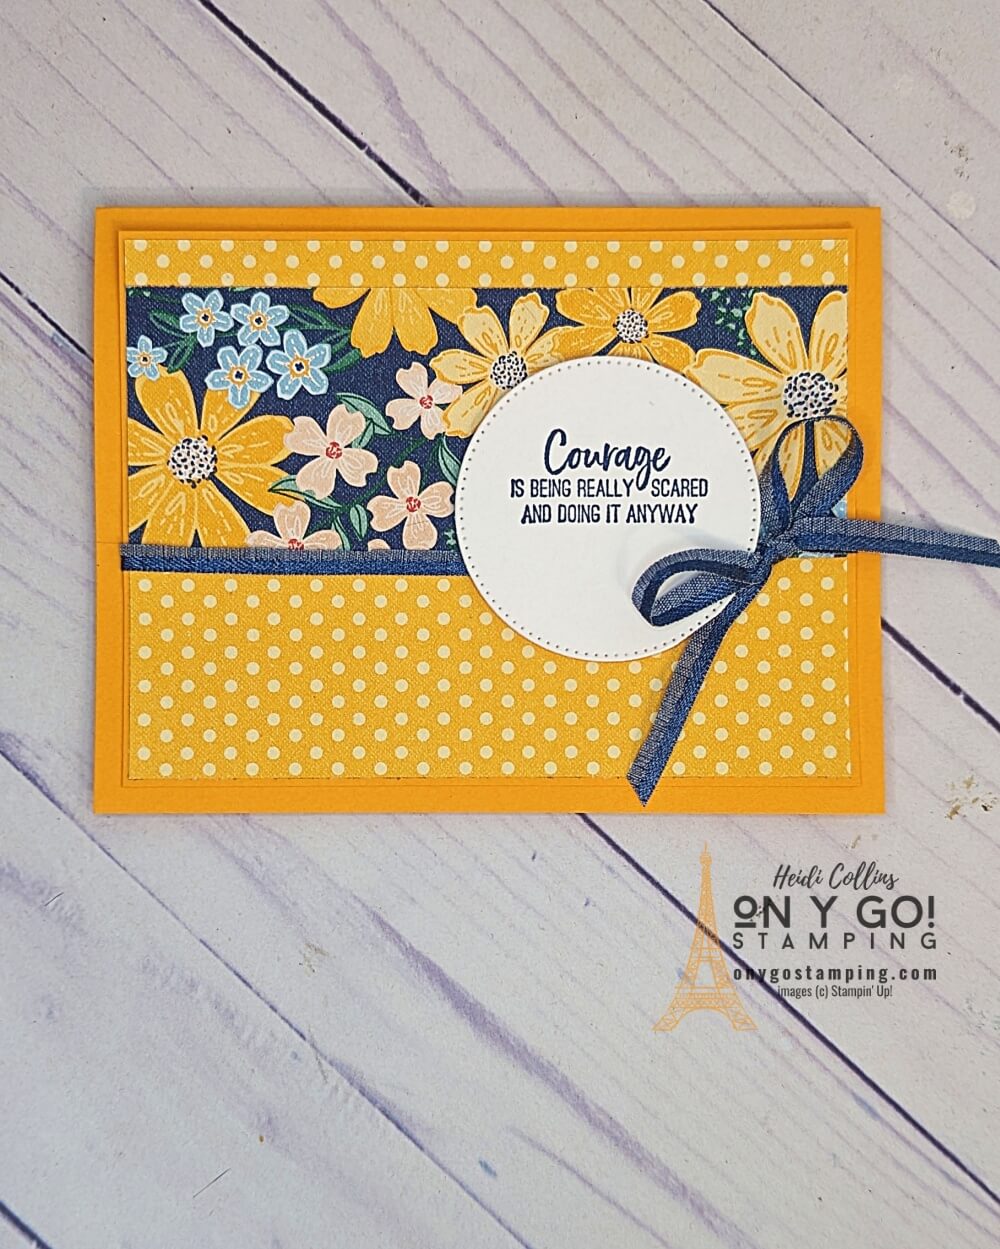 Use the Sending Support Sale-A-Bration stamp set and Regency Park patterned paper from Stampin' Up! to create a handmade encouragement card.